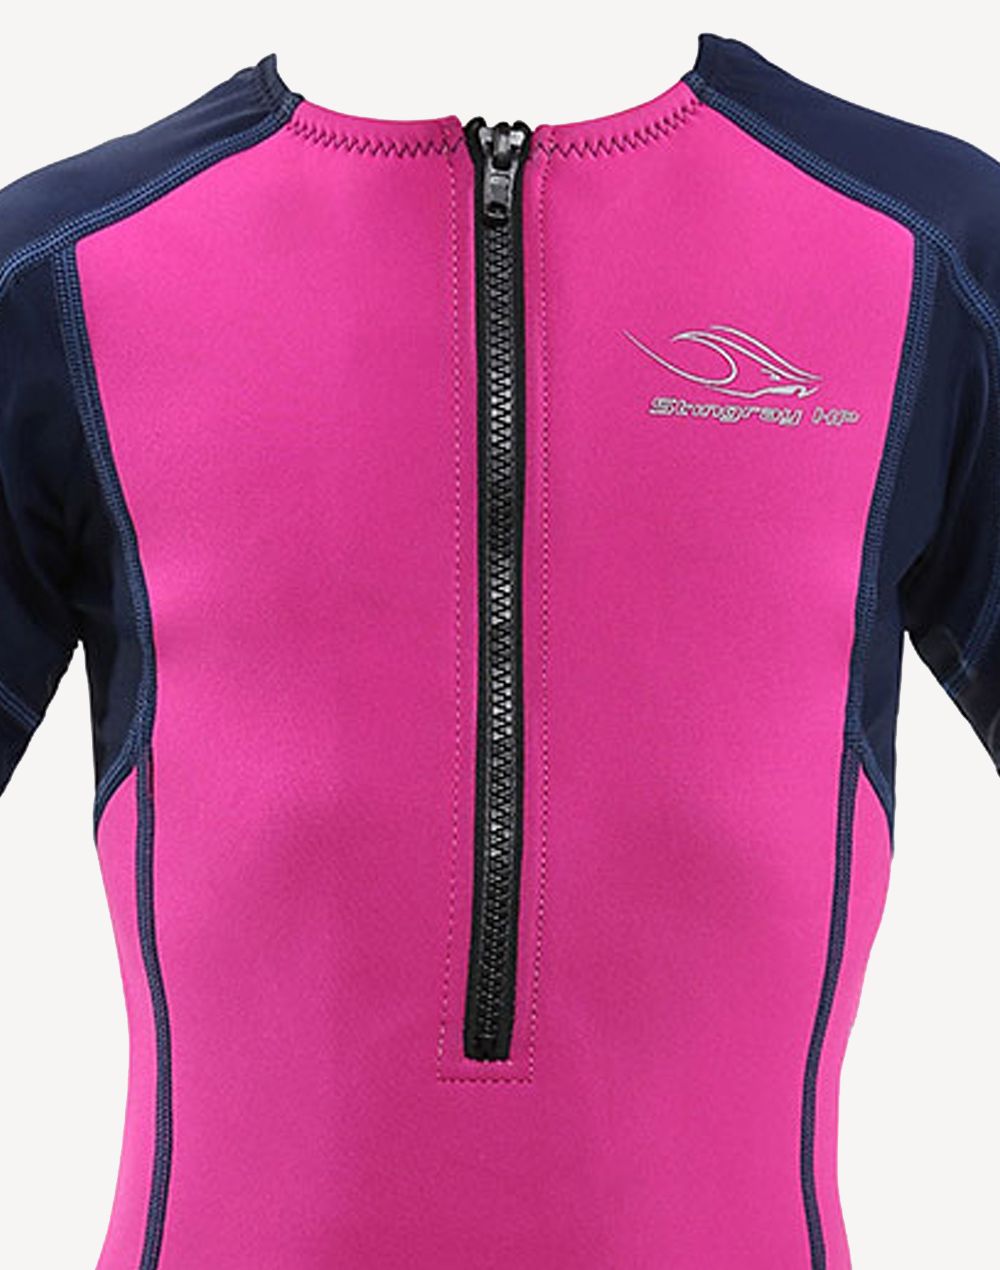 Aqua Sphere Stingray Thermal Youth wetsuit in CANADA